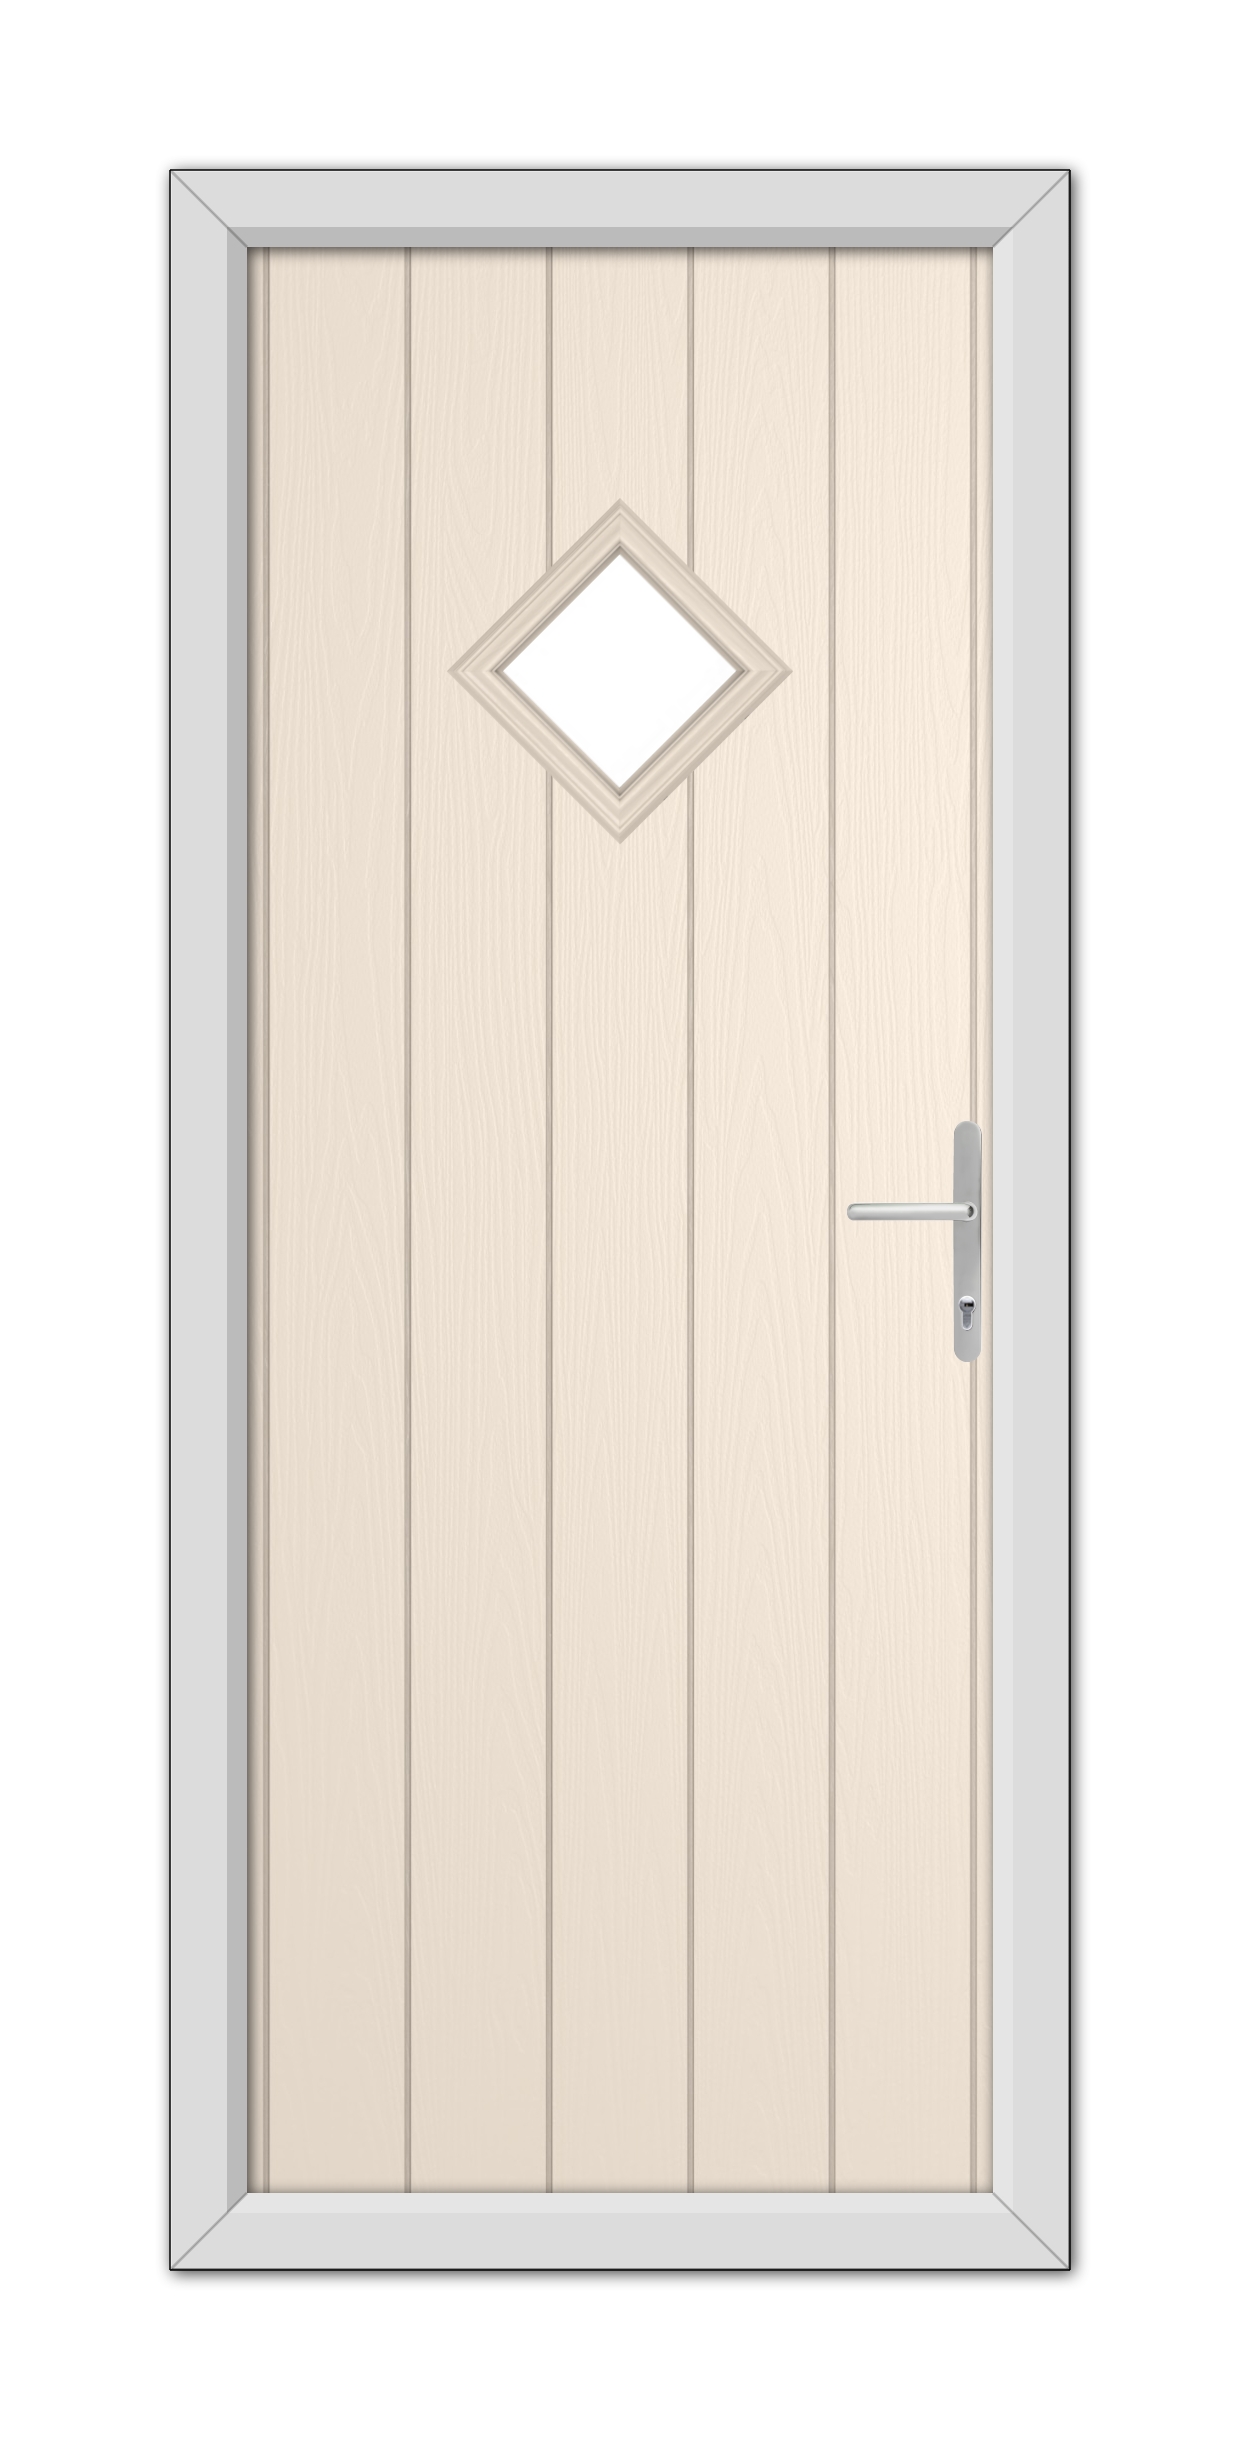 A Cream Cornwall Composite Door 48mm Timber Core with a diamond-shaped window and a modern handle, set within a gray frame.